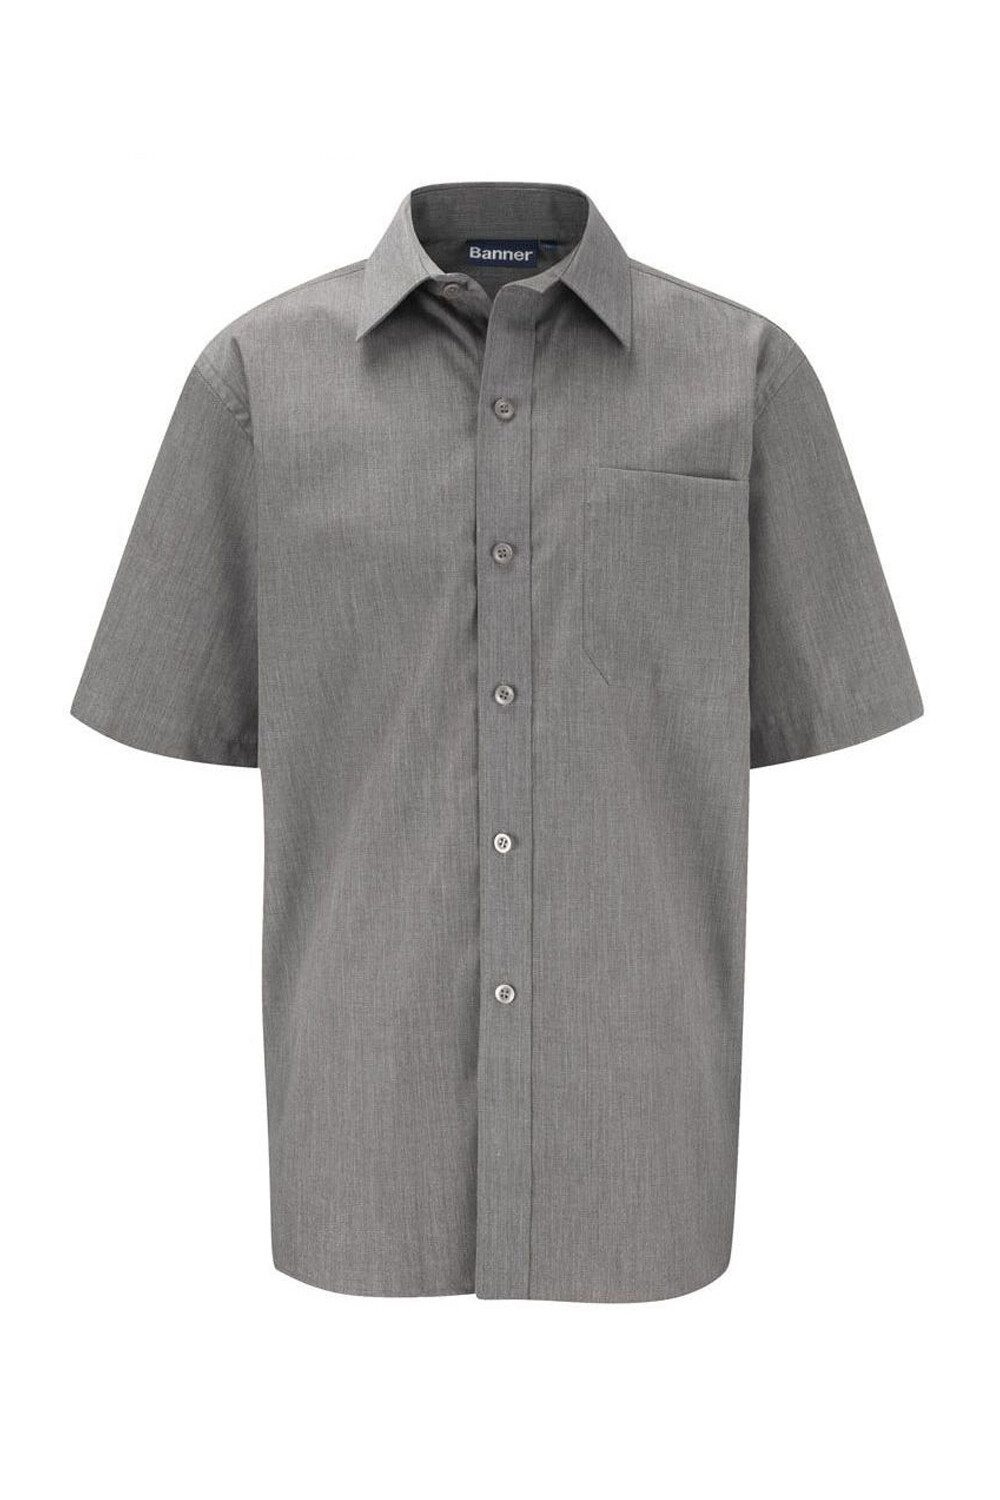 Short Sleeve Shirt in Grey for Boys by Banner